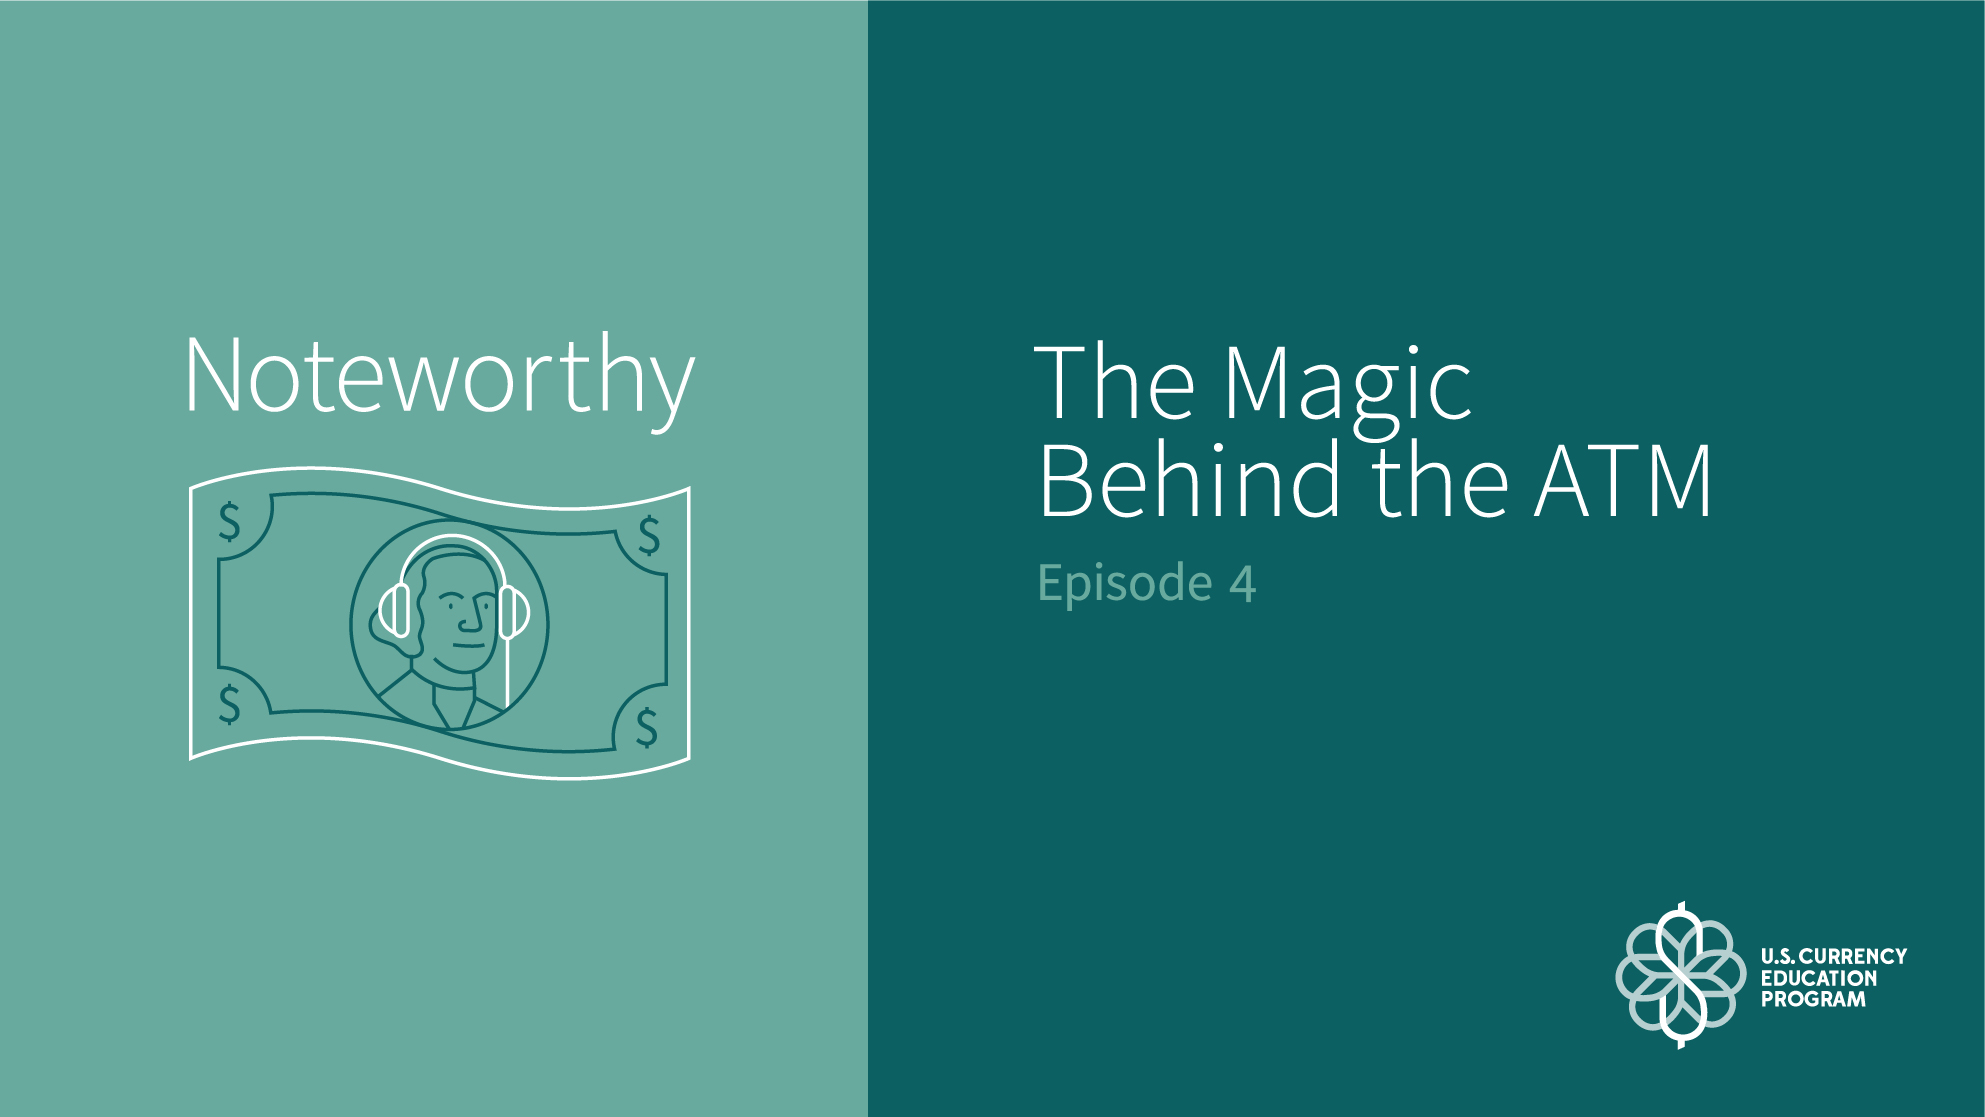 Noteworthy Podcast Episode 4: The Magic Behind the ATM